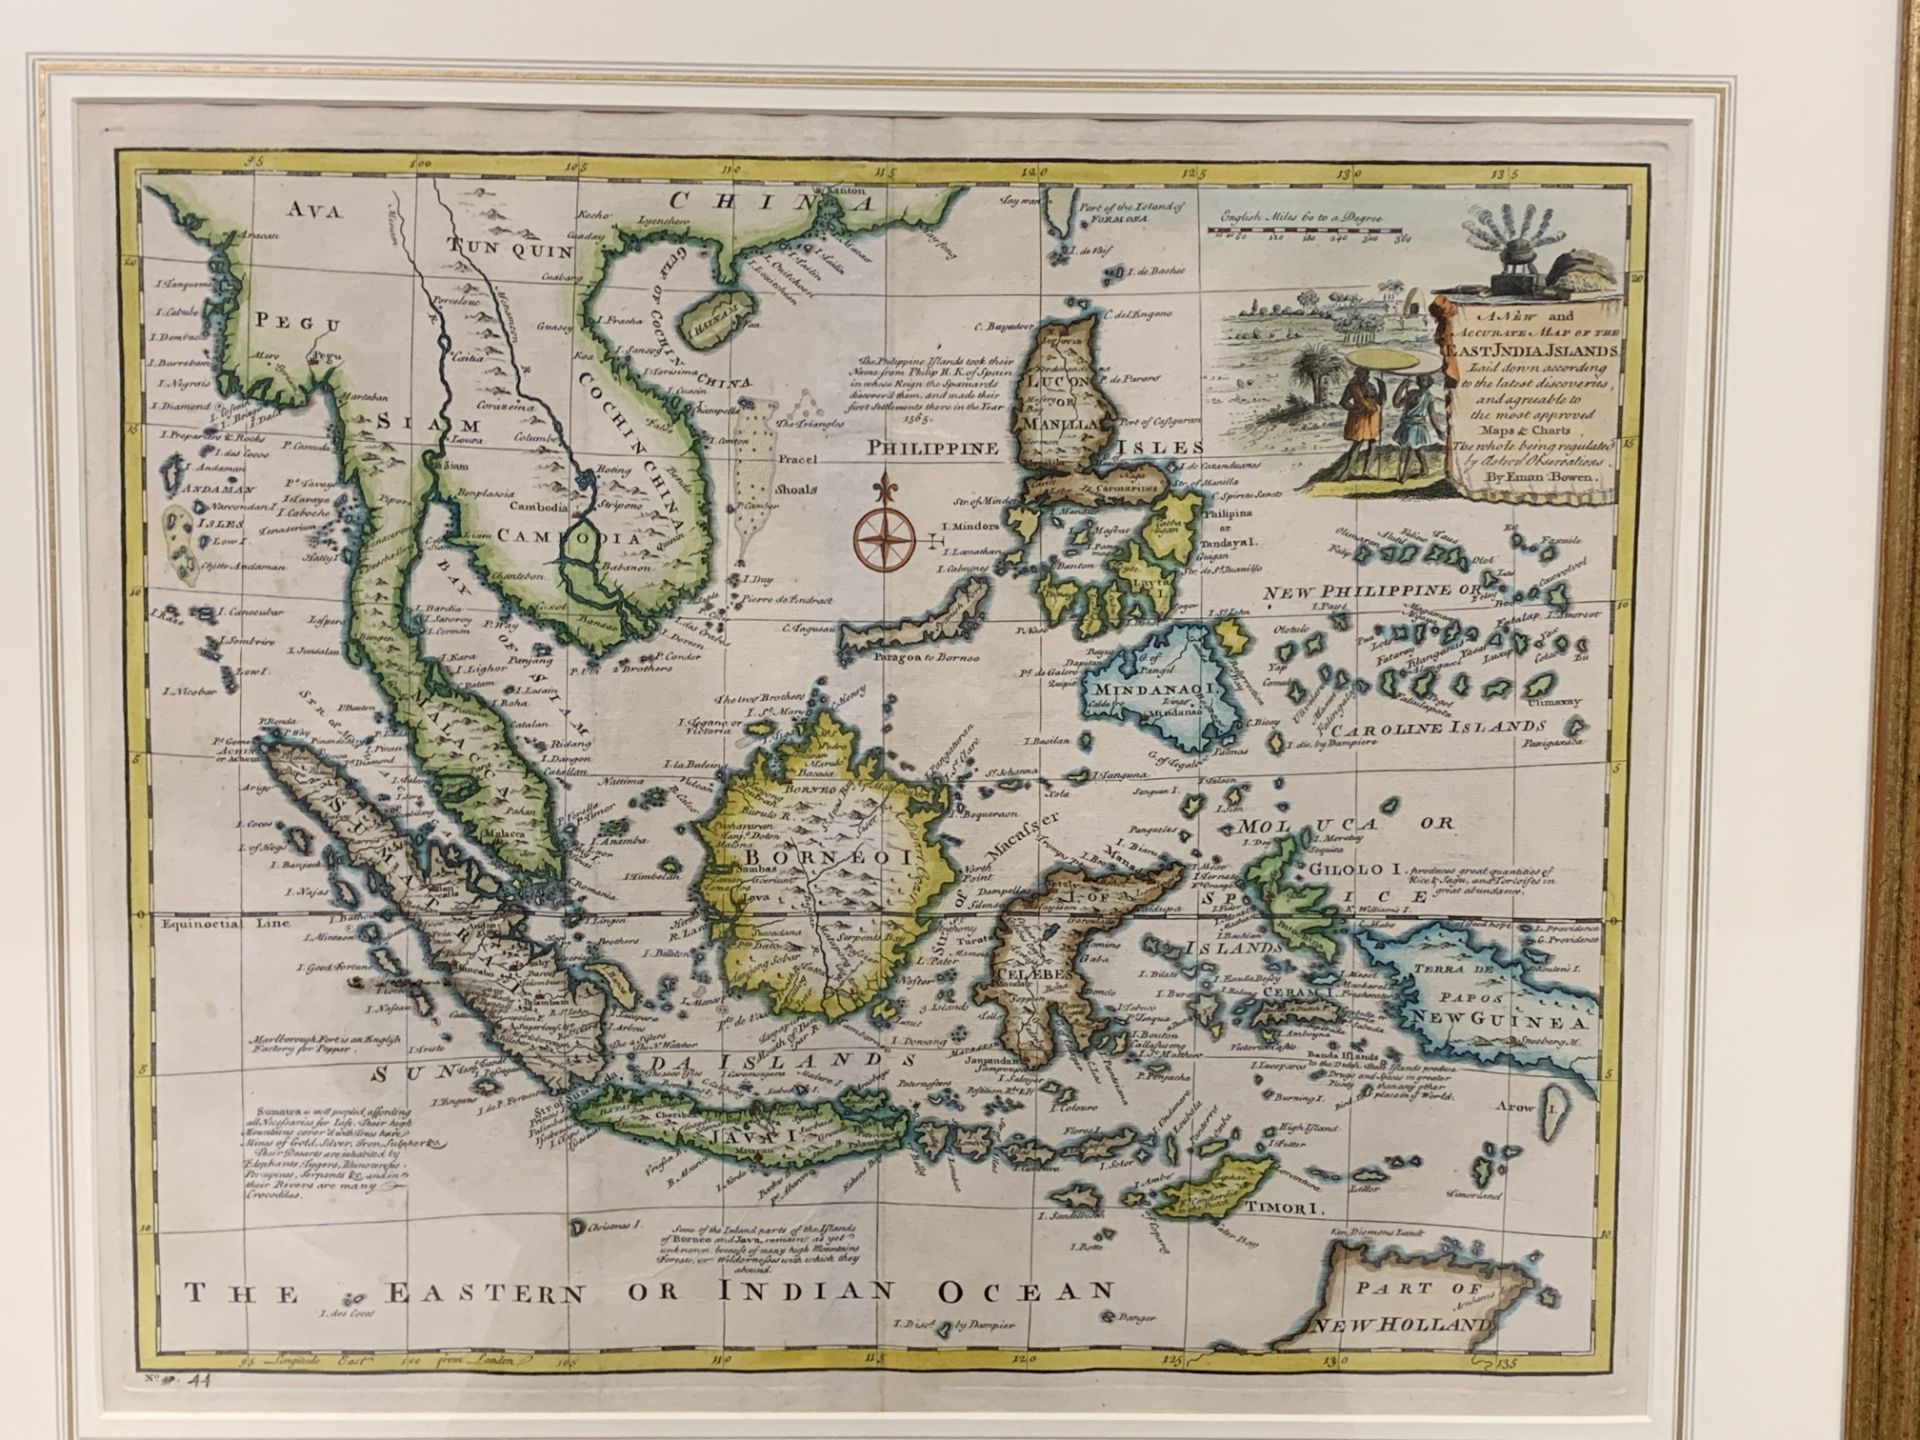 Framed and glazed hand coloured map of the East India Islands